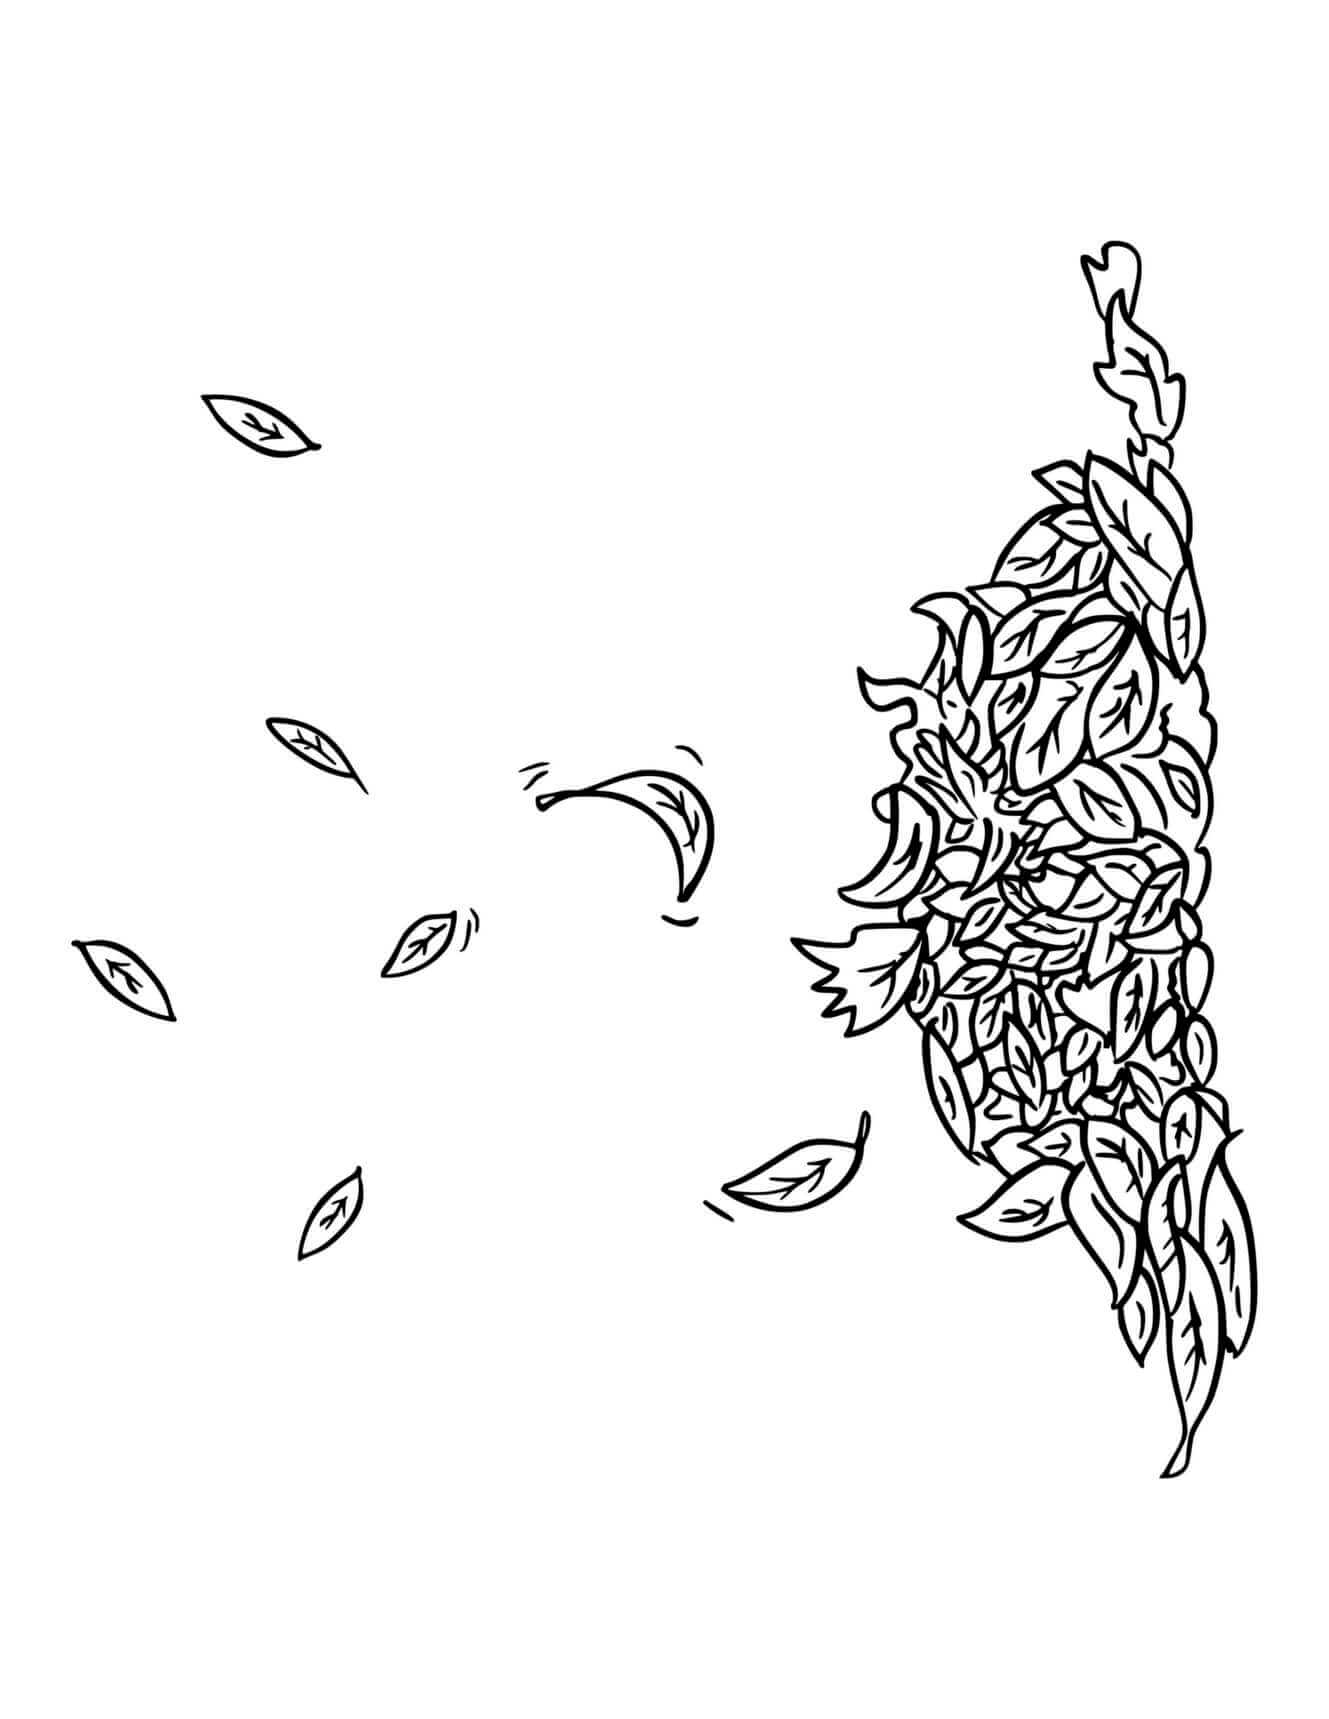 Fall Pile Of Fallen Leaves Coloring Page